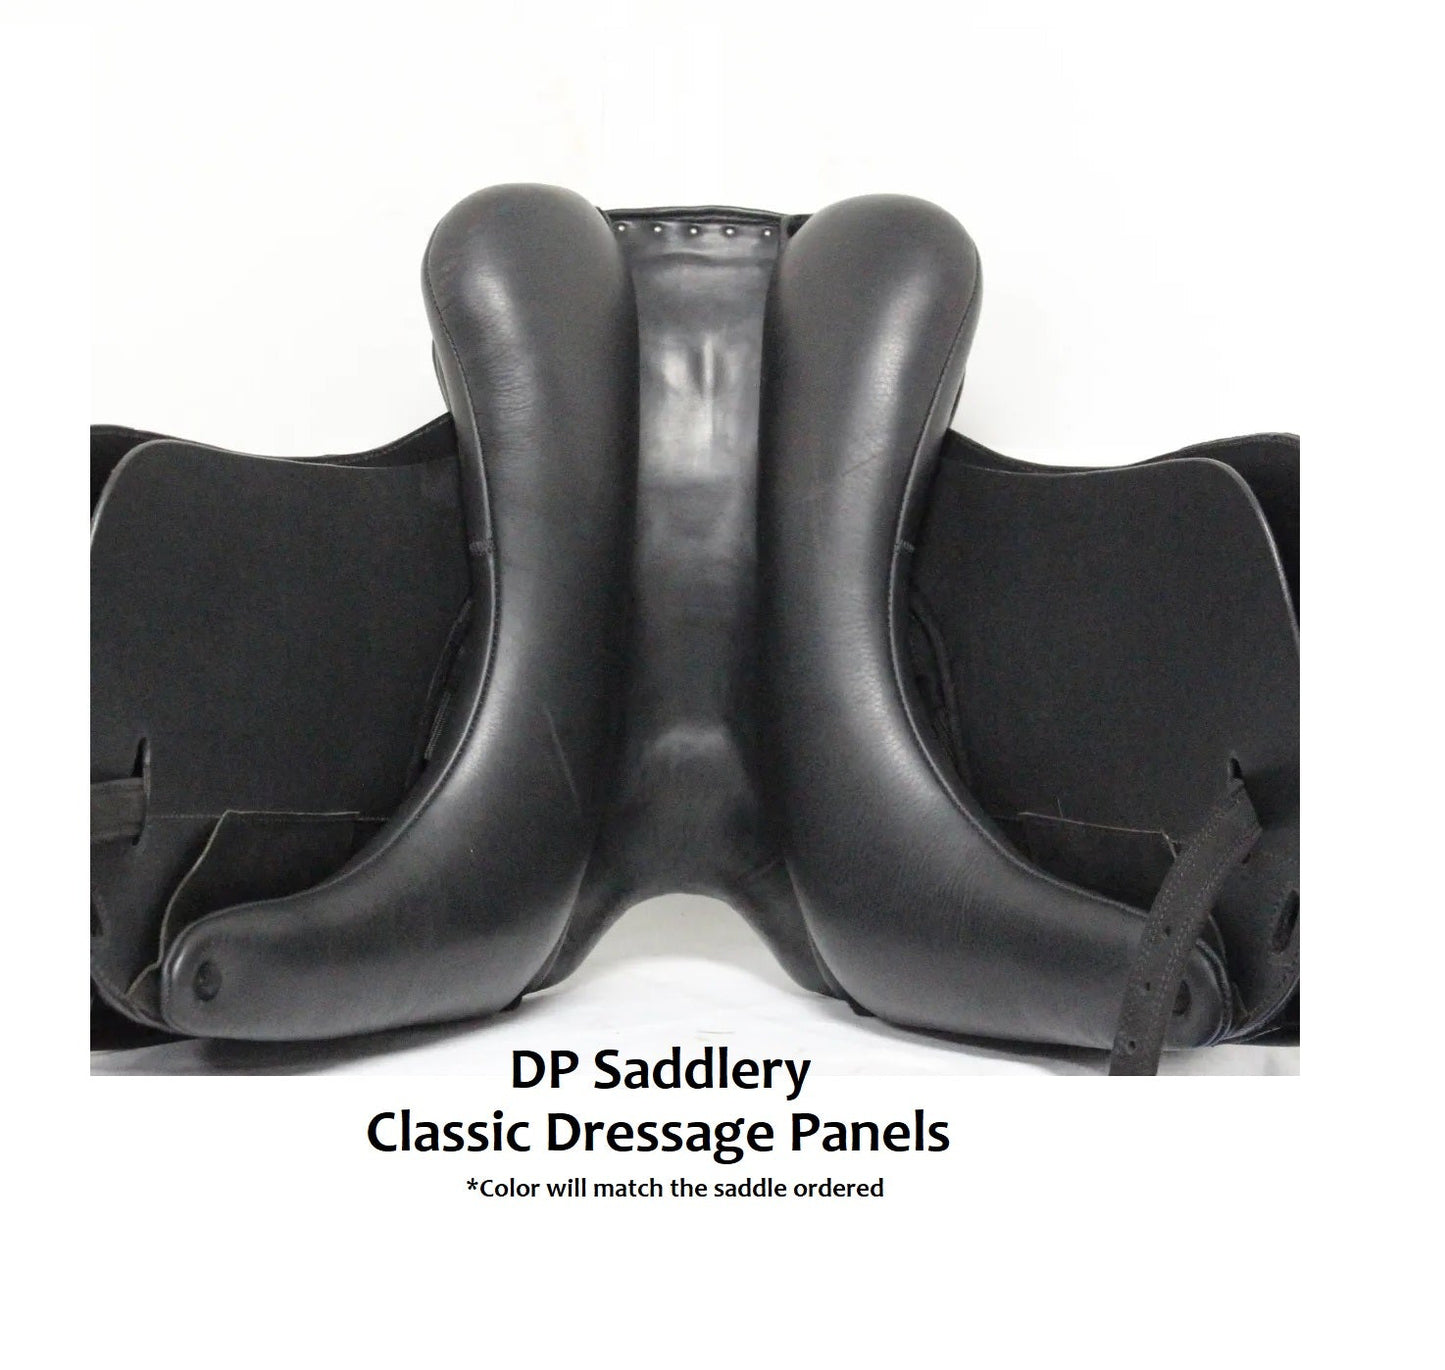 DP Saddlery Classic Dressage 6294 17.5 in